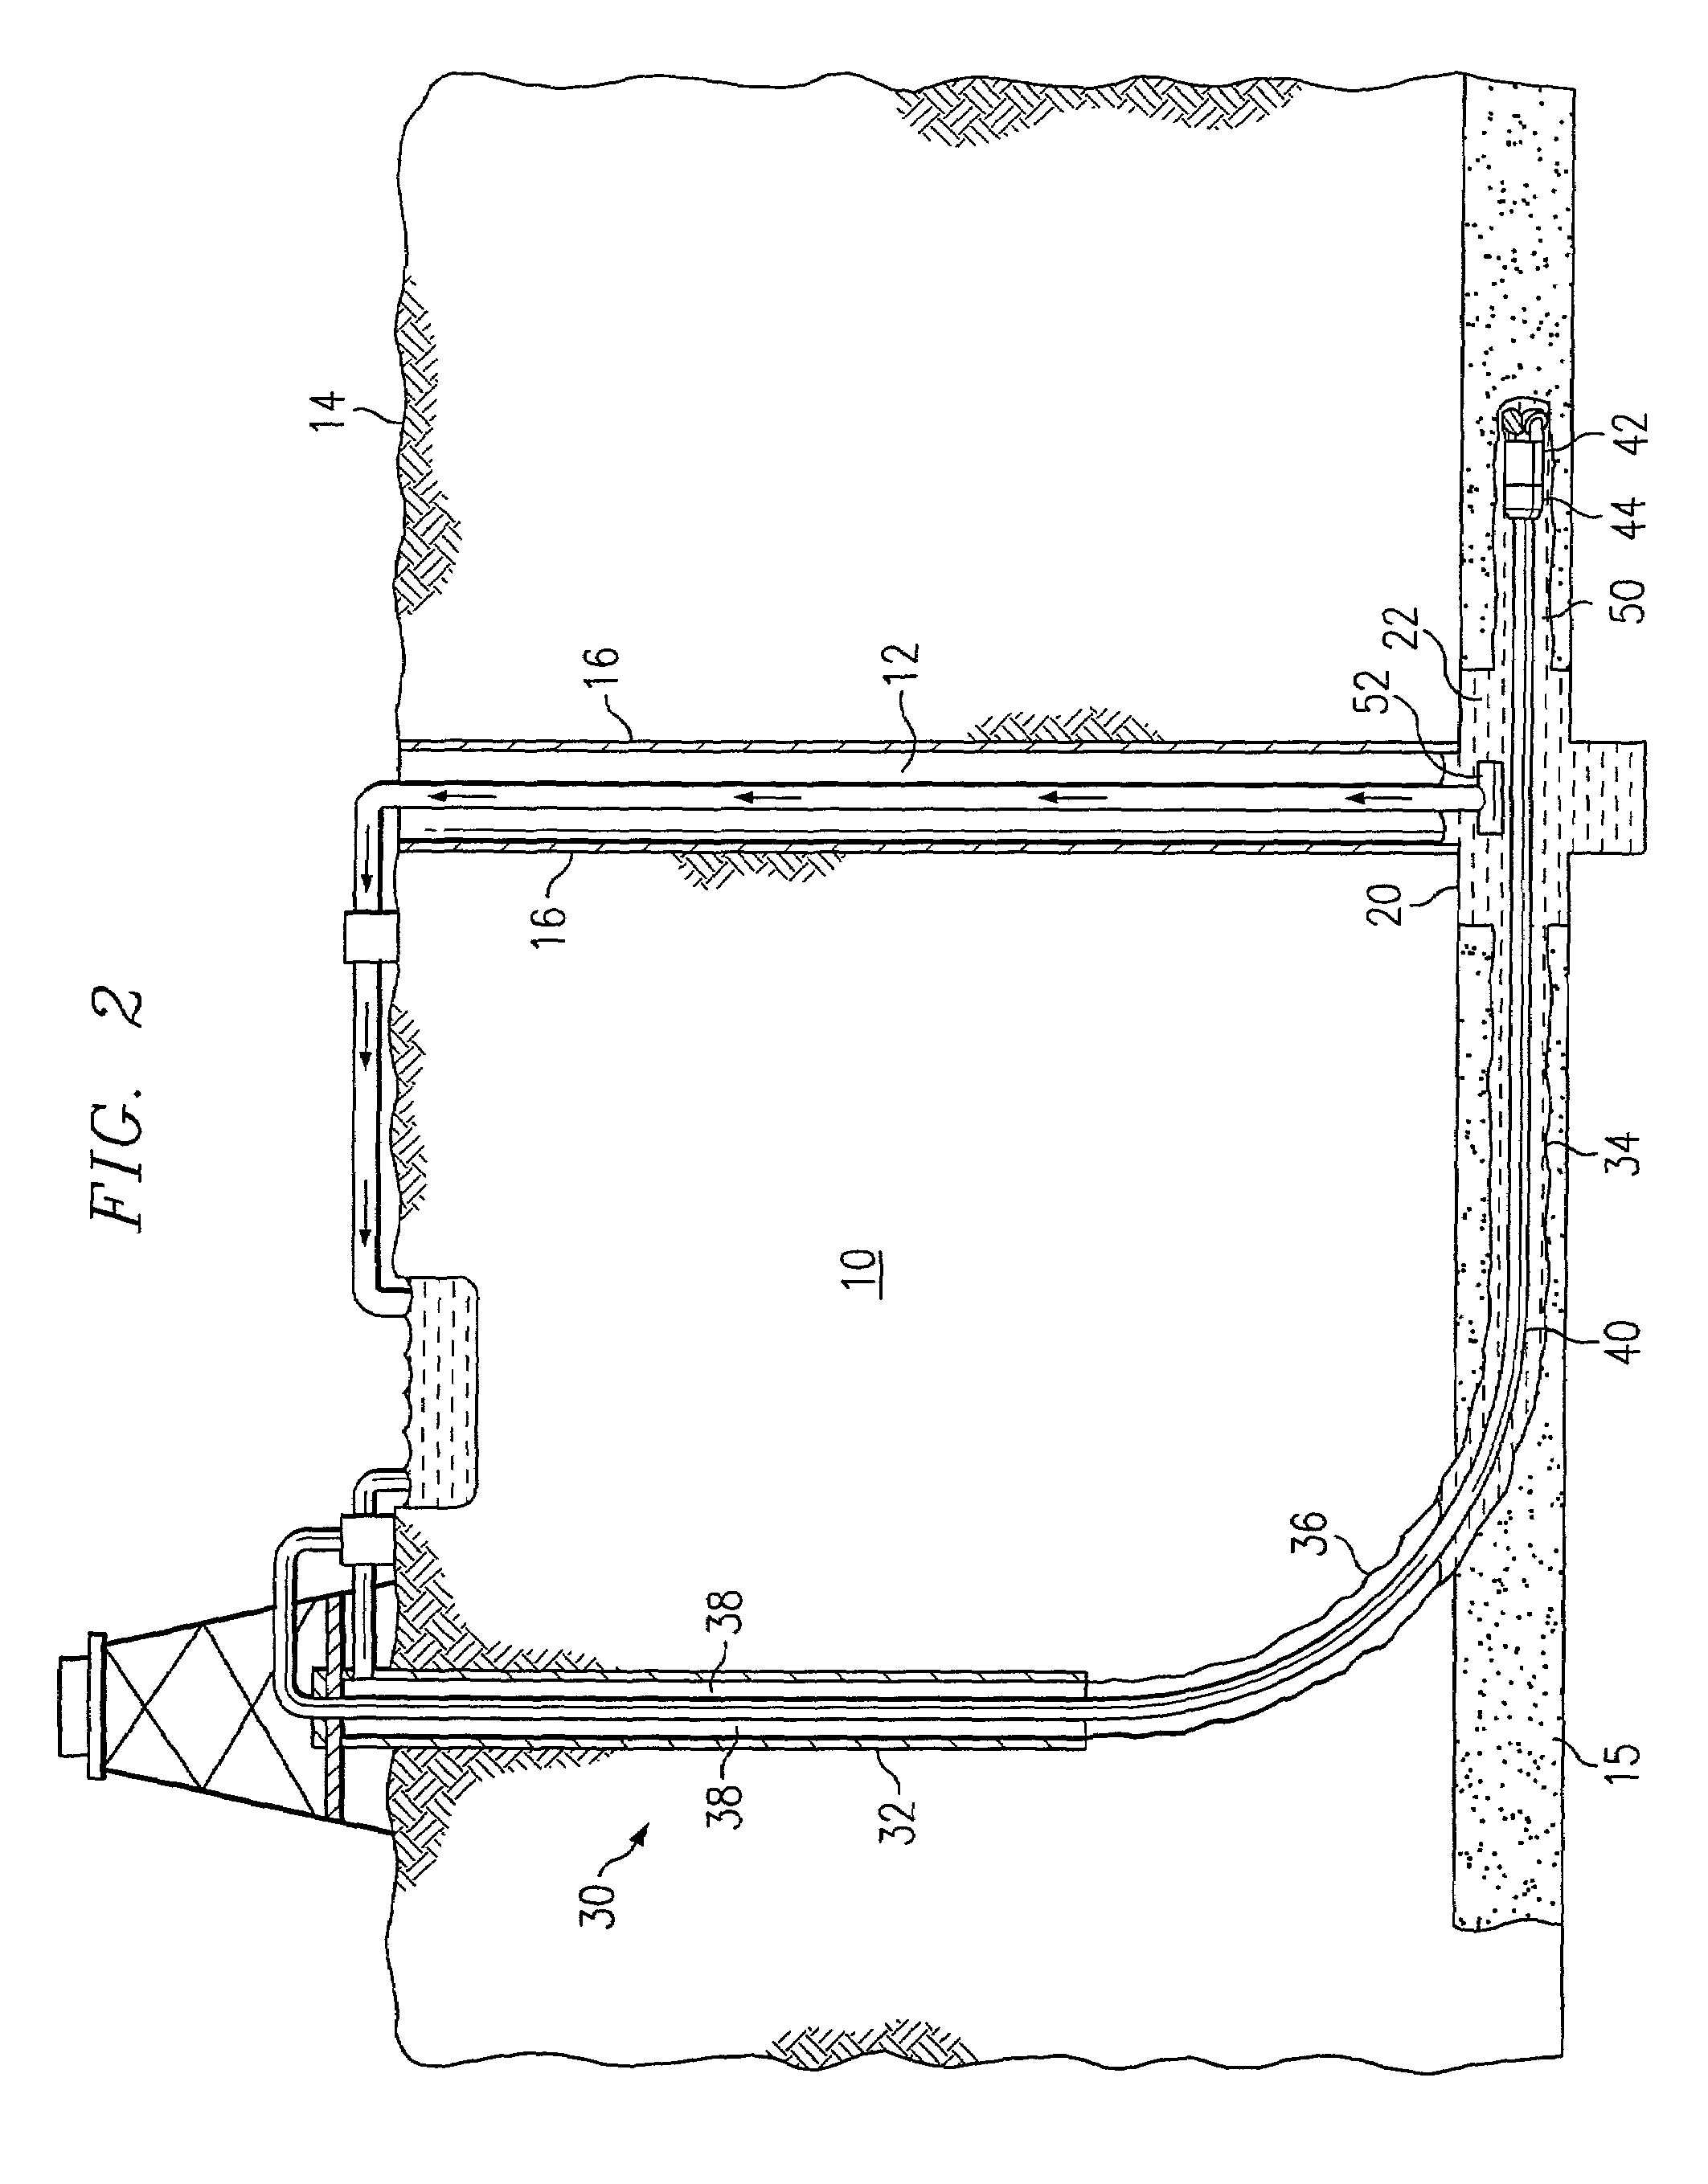 Method and system for surface production of gas from a subterranean zone